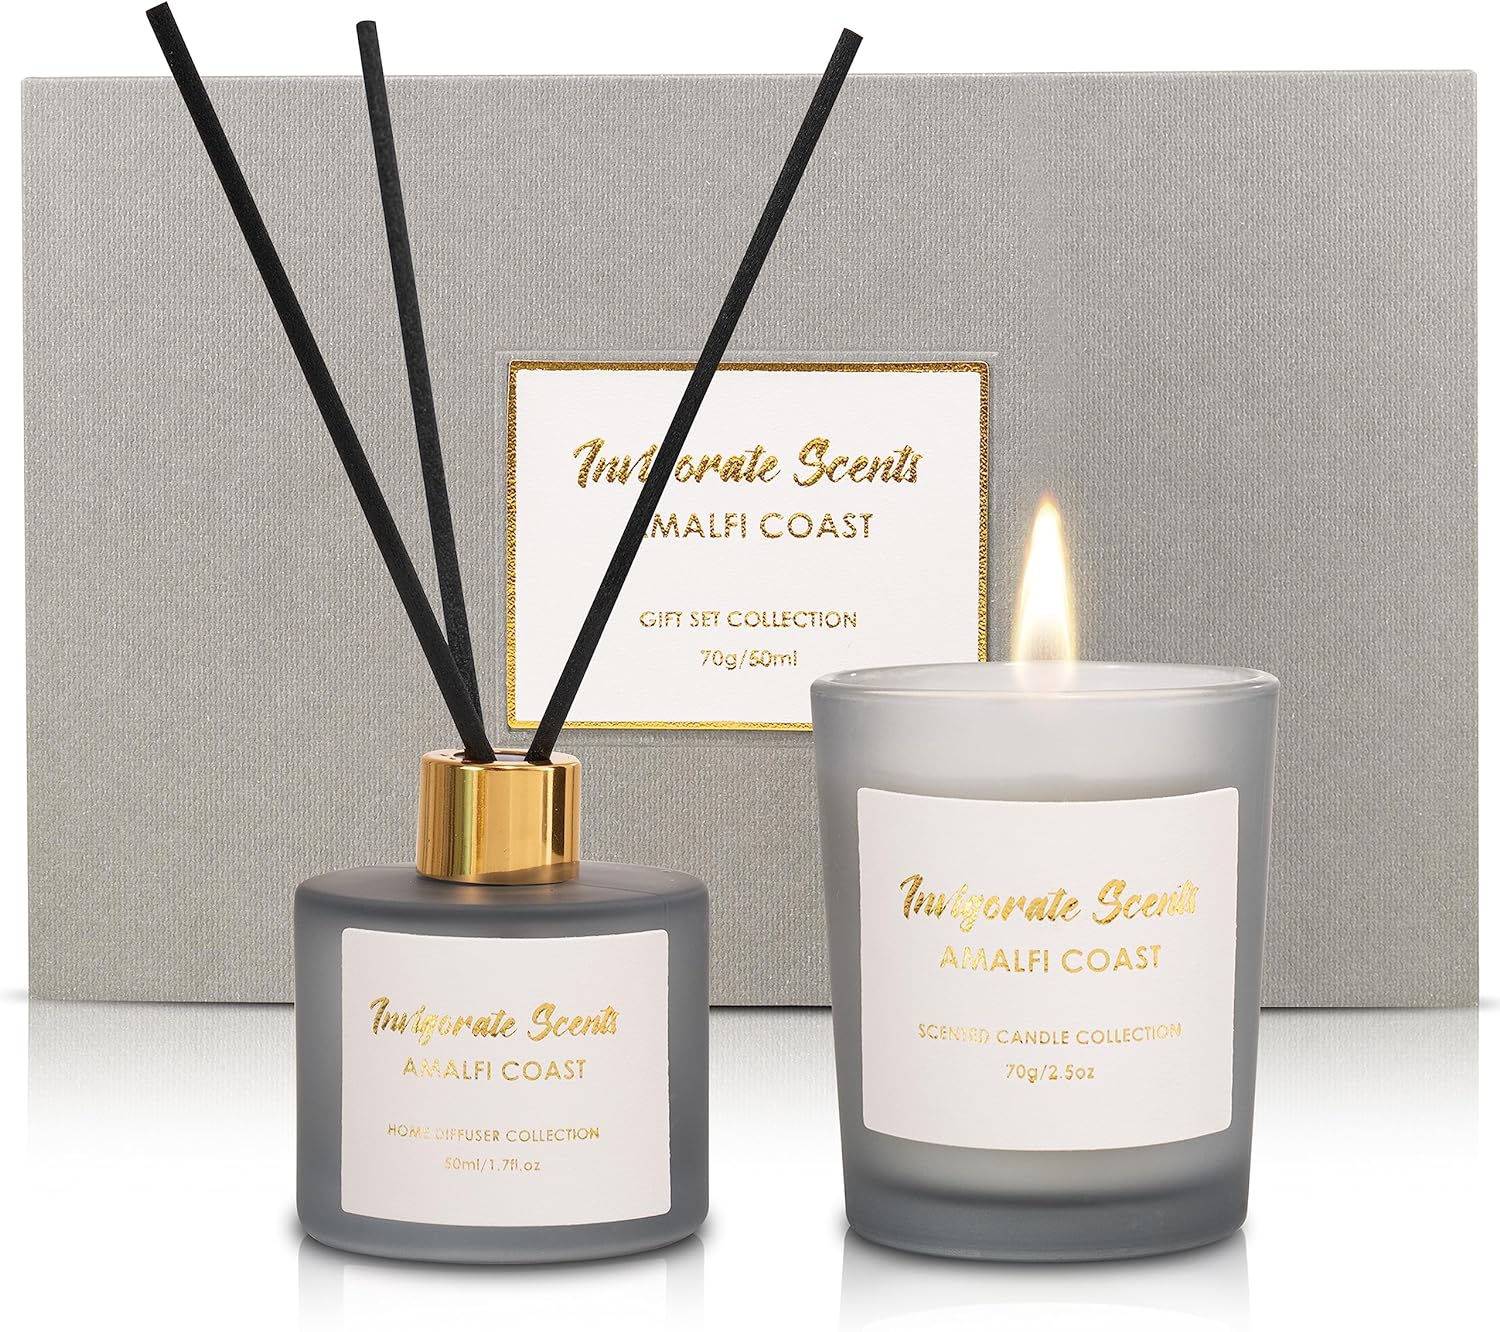 Invigorate Scents Amalfi Coast Candle & Diffuser Gift Set, Candles Gifts for Women, Birthday Gifts for Women, Birthday Presents for Mum, Congratulations Gifts, Ladies Gifts, Scented Candles